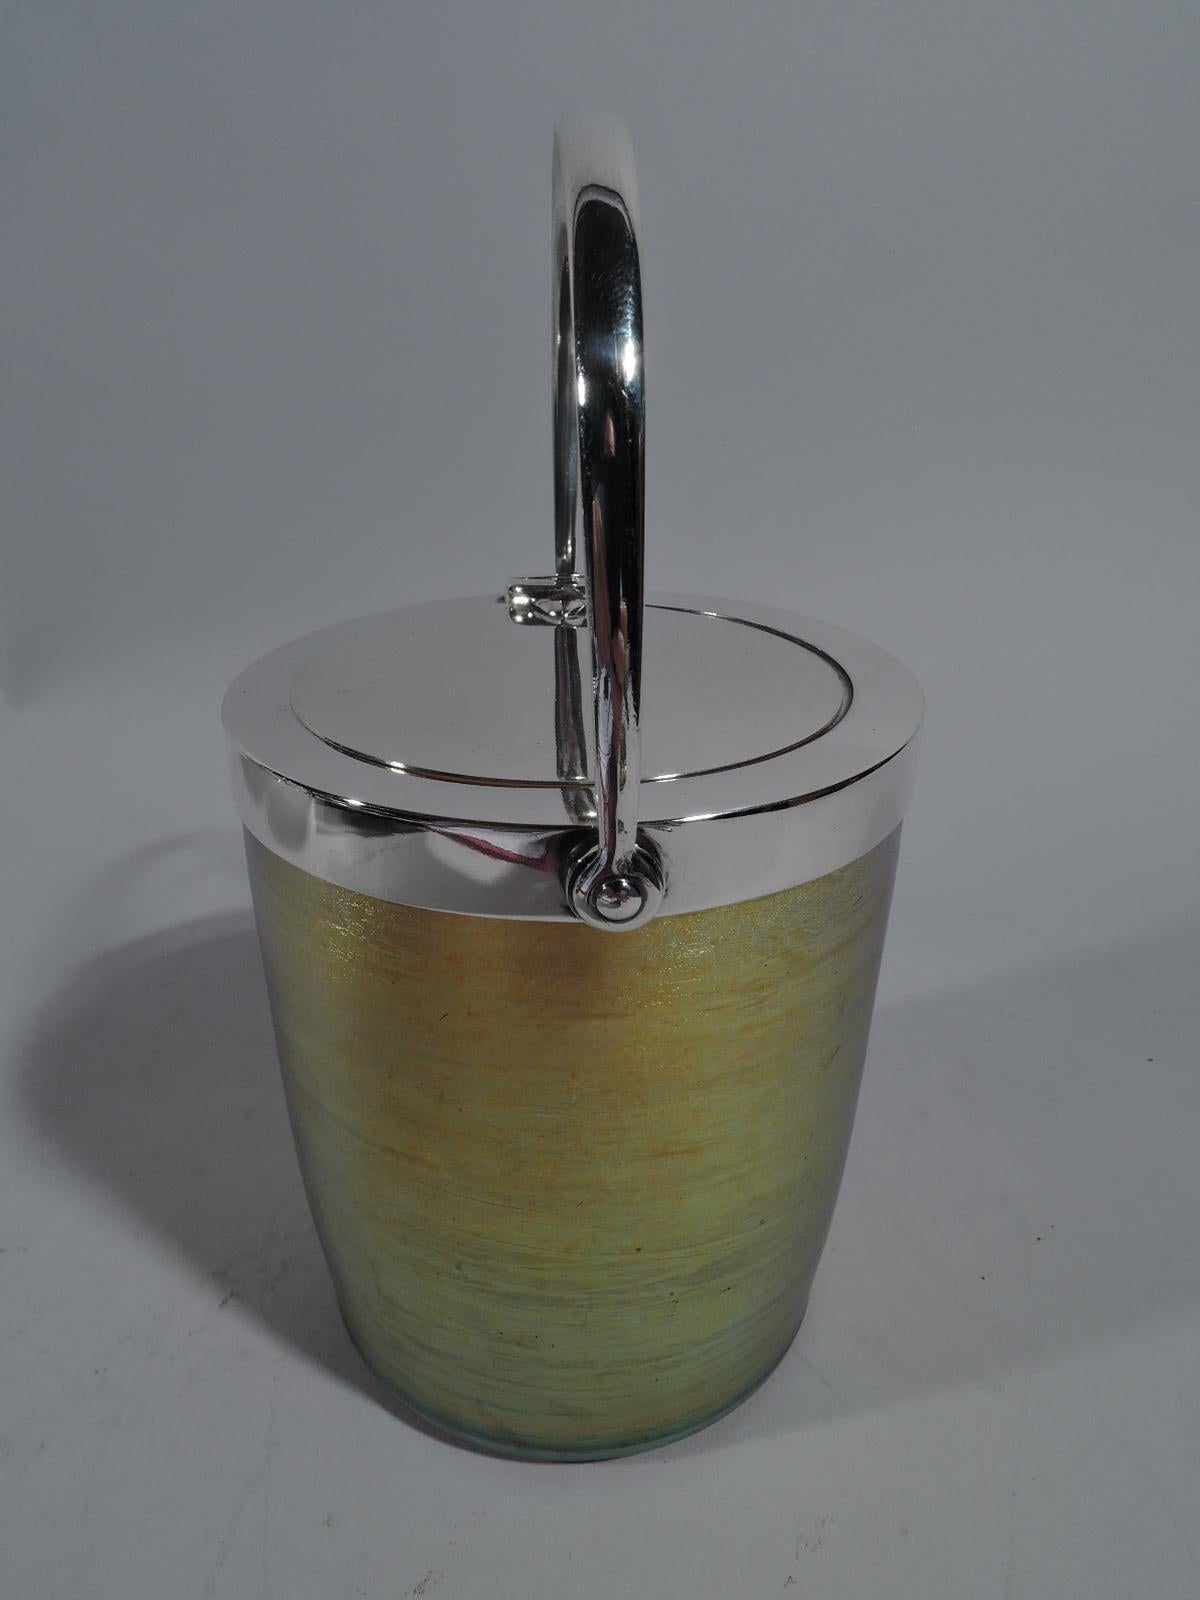 Beautiful Art Nouveau sterling silver and Favrile glass jam pot. Made by Tiffany & Co. in New York. Cylindrical with straight sides. Glass nuanced and striated gold. Pontil mark. Silver collar with flush hinged cover that opens by lowering the